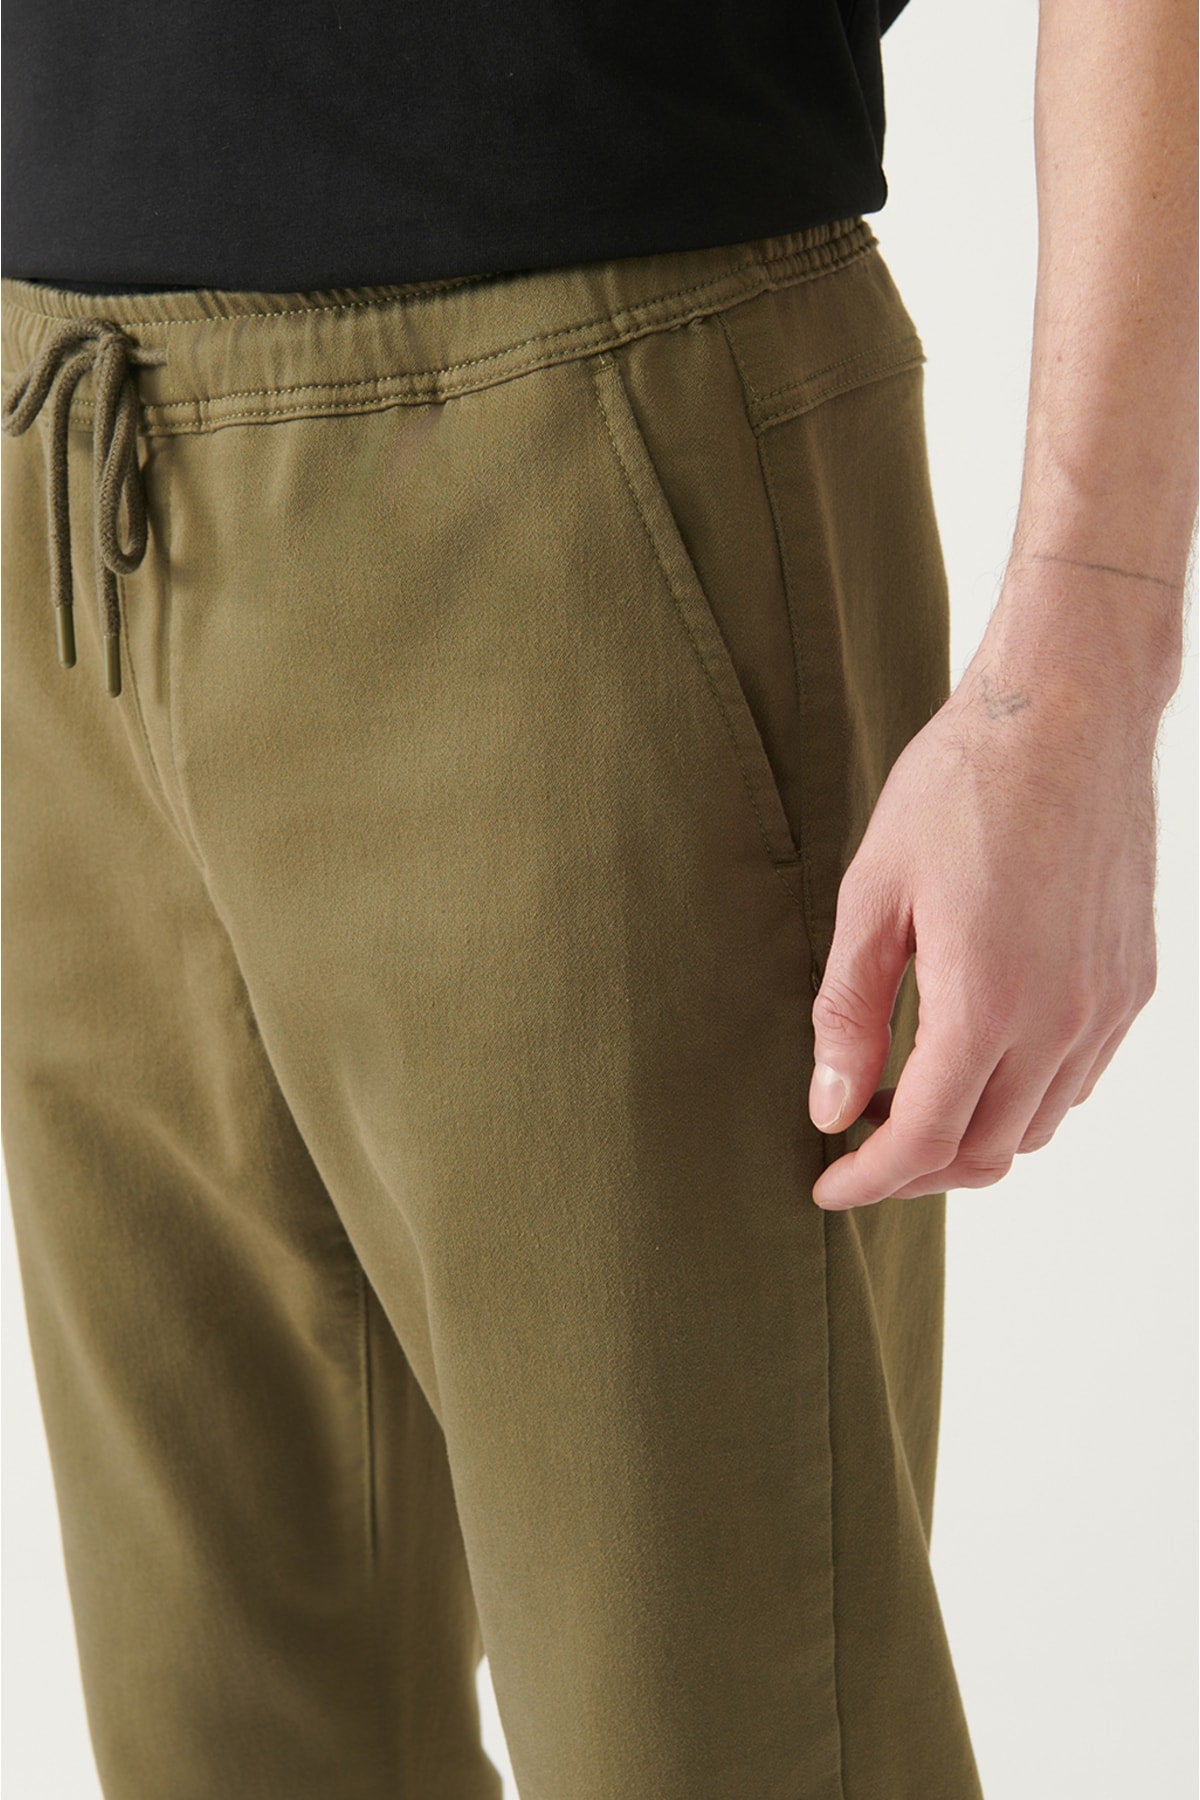 Men's Khaki Side Pocket Knitted Laccked Relaxed Fit Jogger Pants B003025